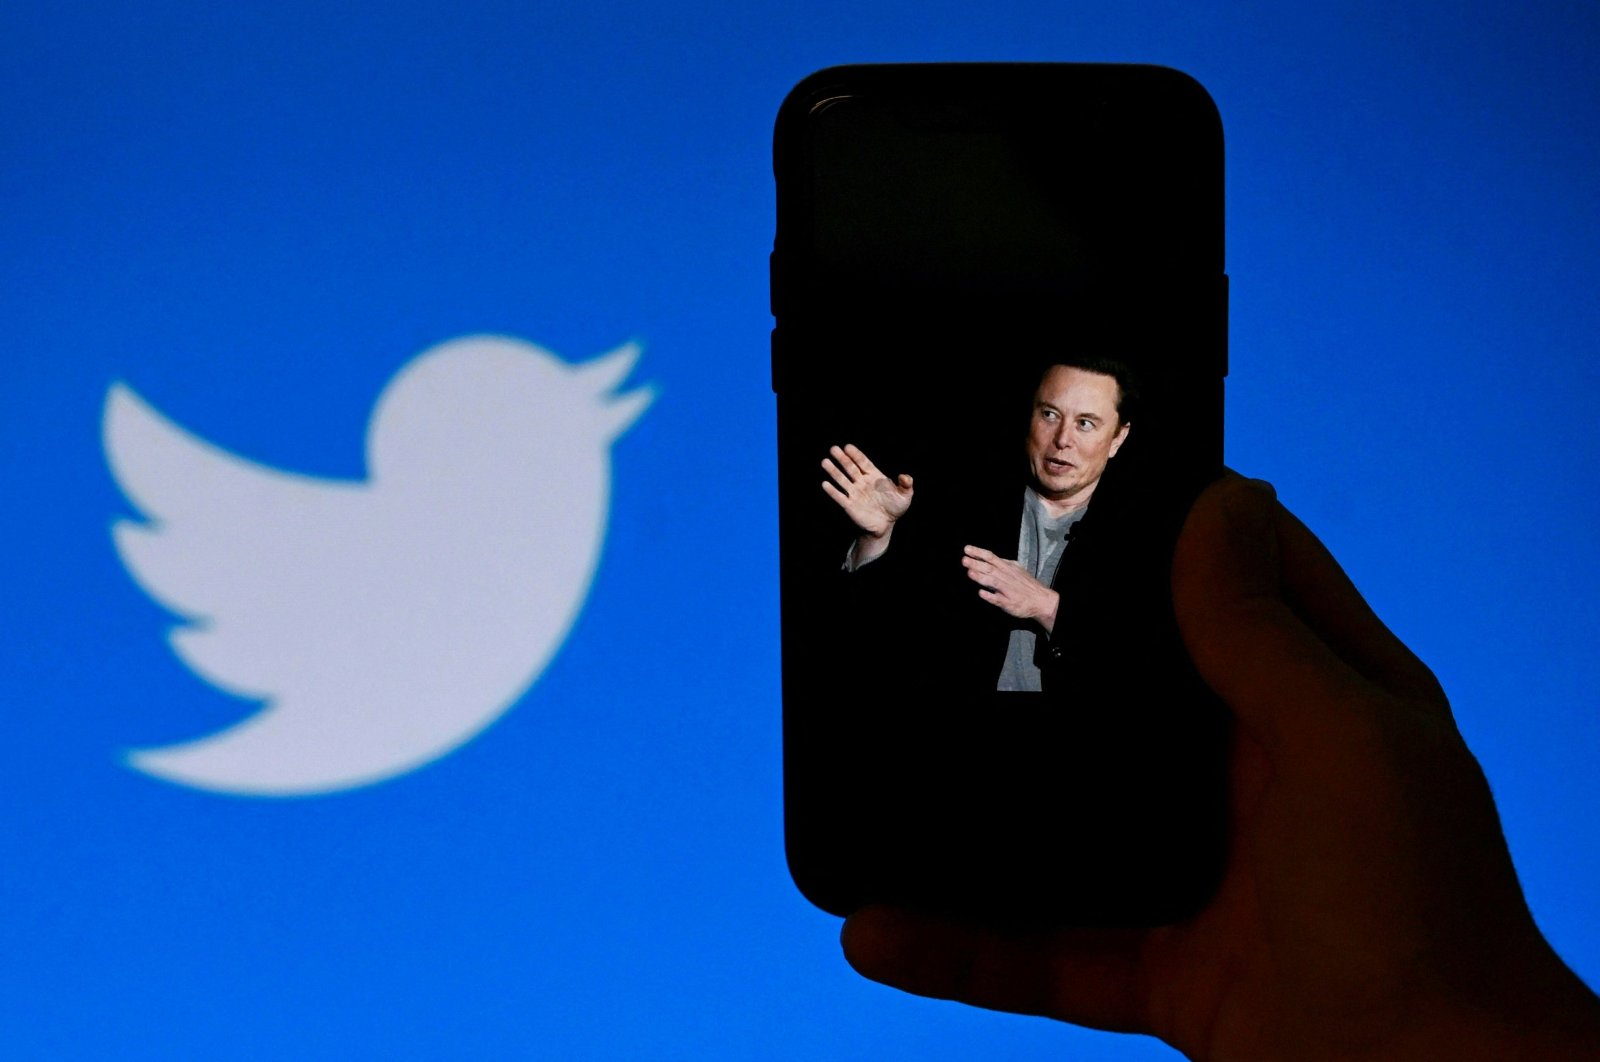 A phone screen displays a photo of Elon Musk with the Twitter logo shown in the background, in Washington, D.C., U.S., Oct. 4, 2022. (AFP Photo)